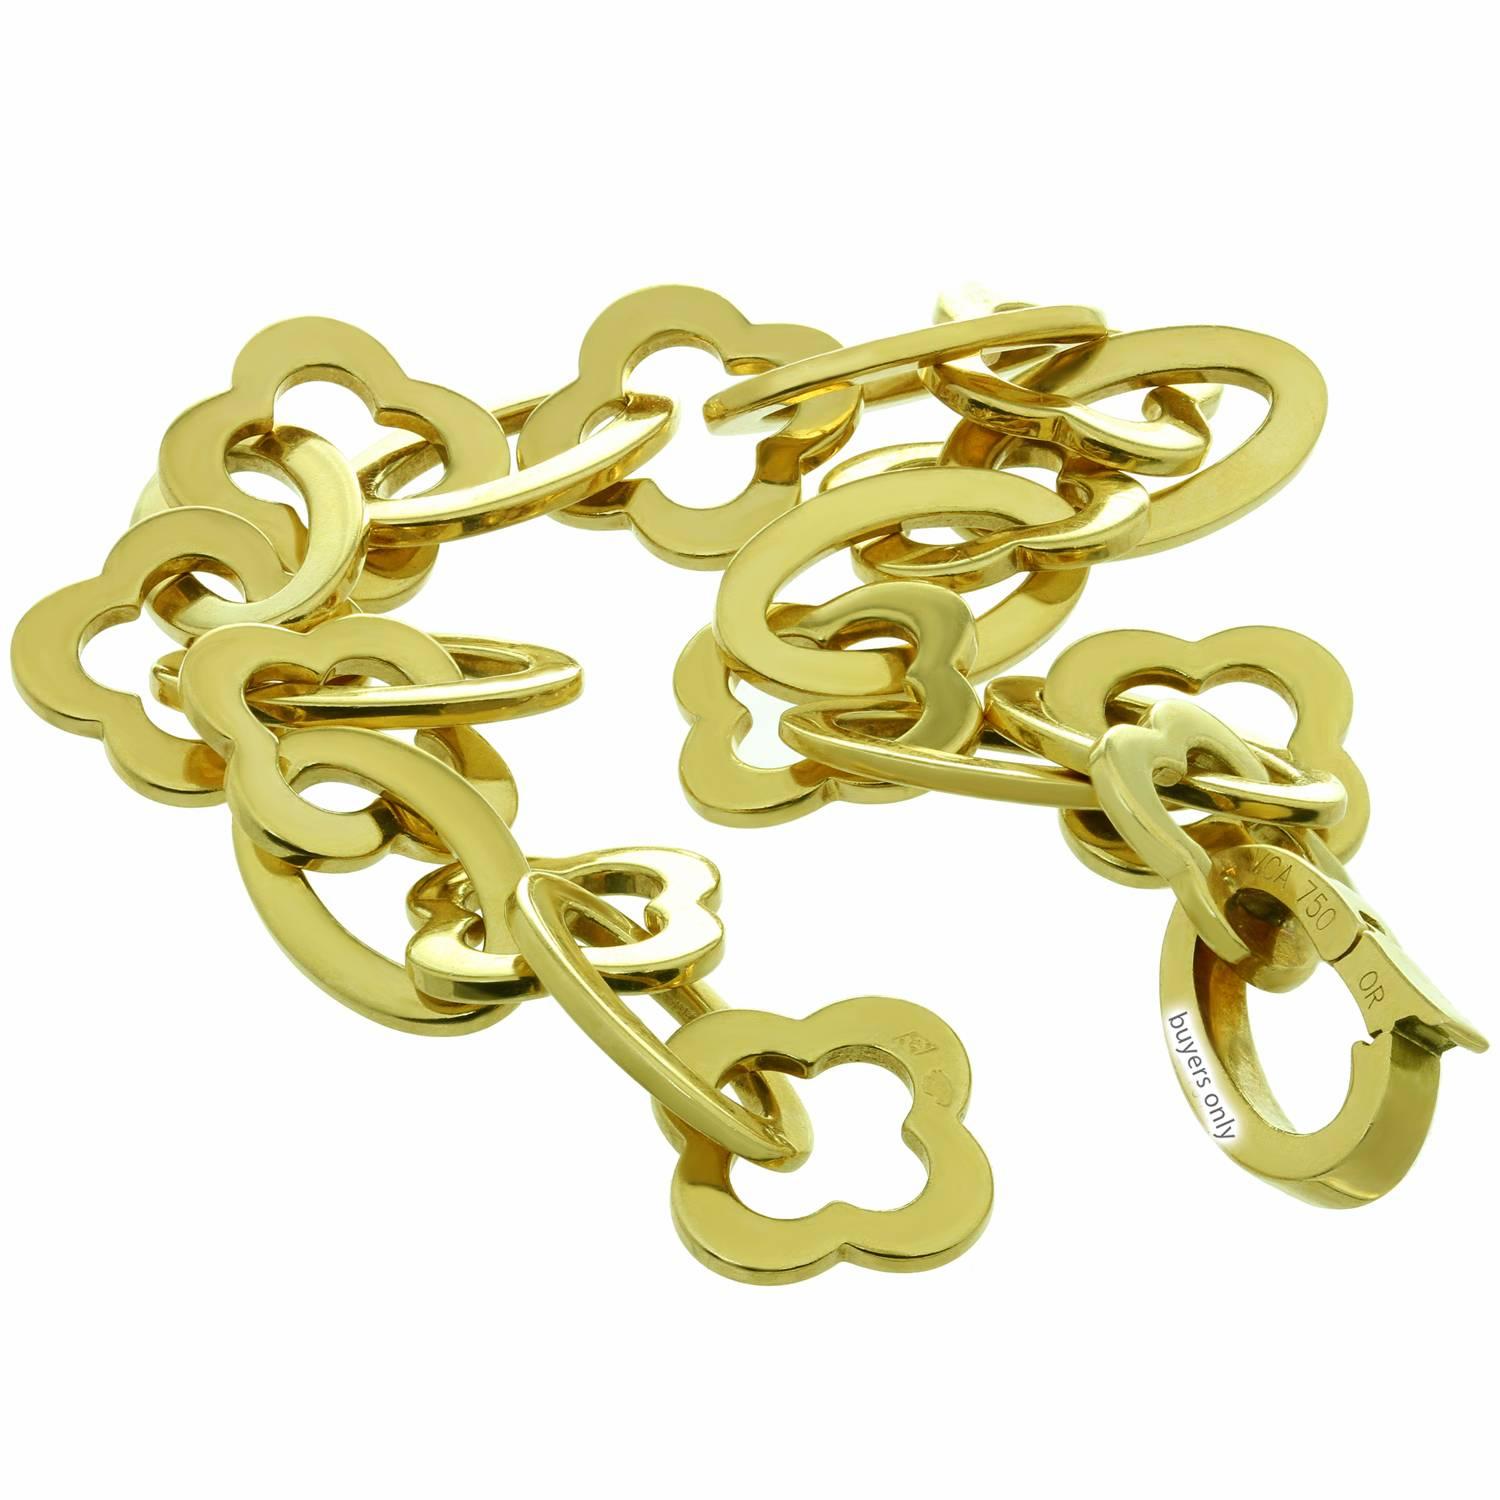 This stunning Van Cleef & Arpels bracelet from the classic Byzantine Alhambra collection features oval and clover links crafted in 18k yellow gold and completed with a foldover clasp. Made in France circa 2000s. Measurements: 0.47